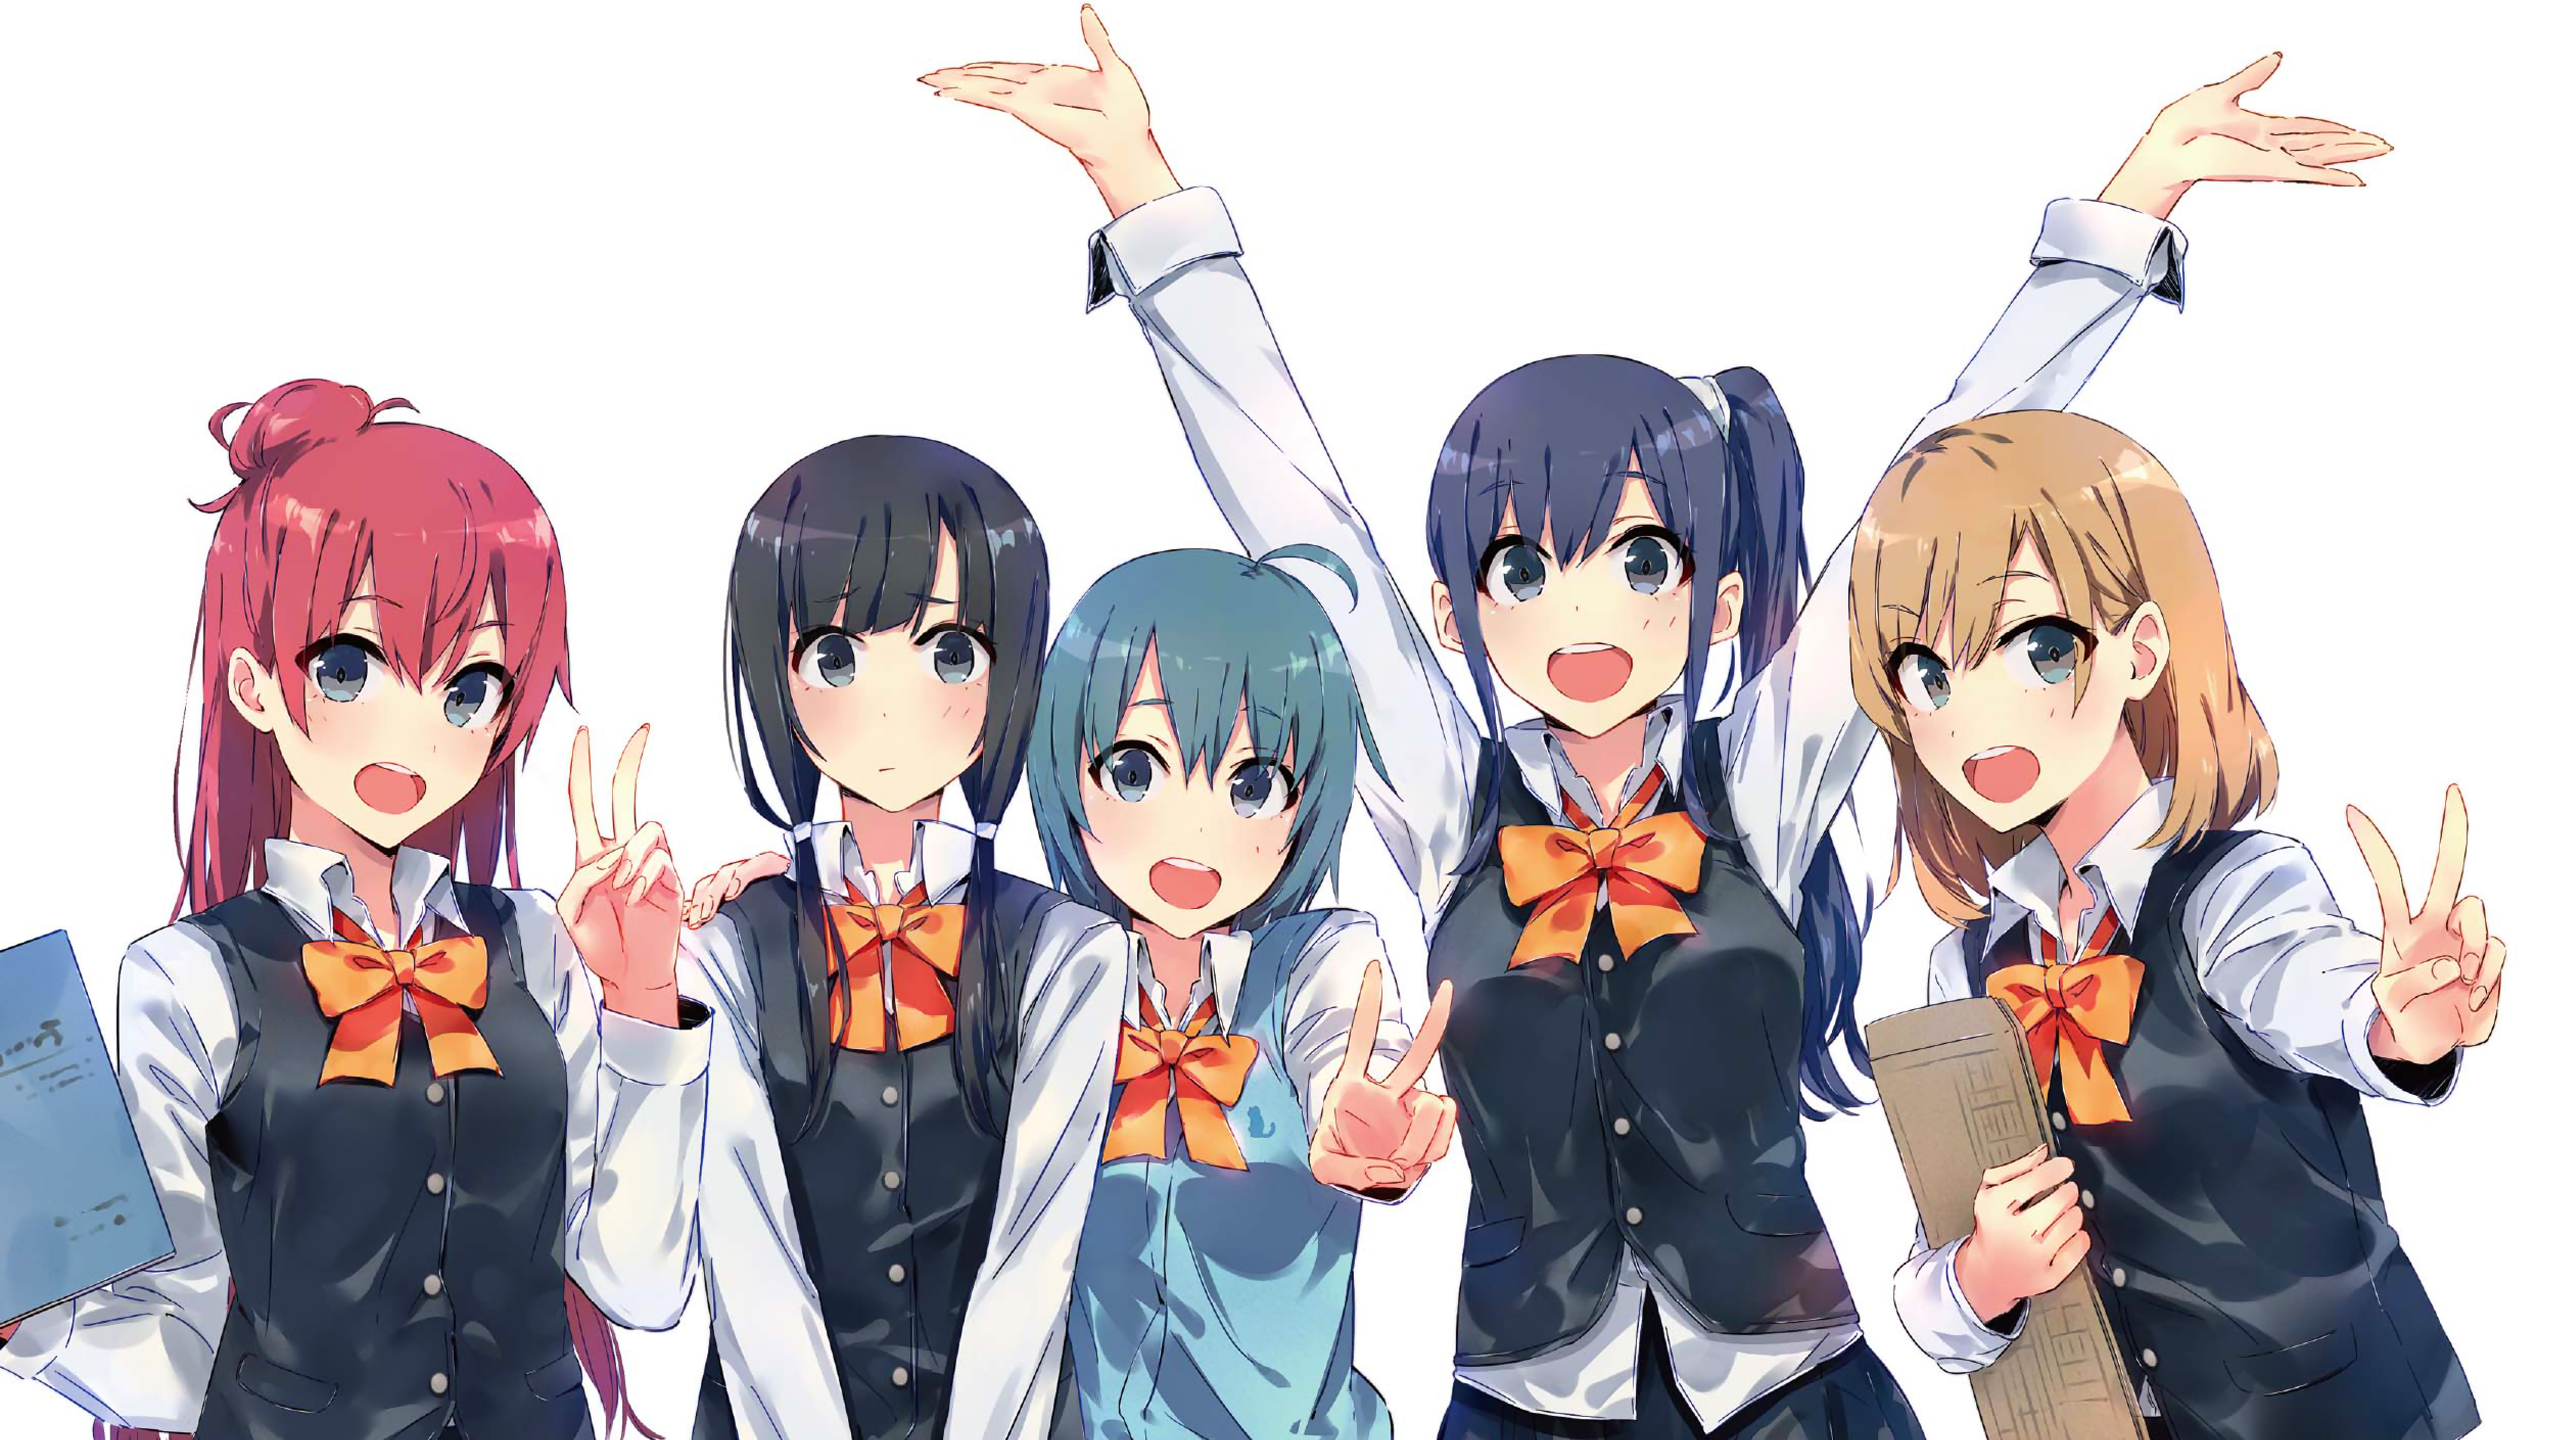 Anime 2560x1440 Shirobako anime girls anime open mouth arms up simple background group of women victory sign hand gesture redhead black hair blonde